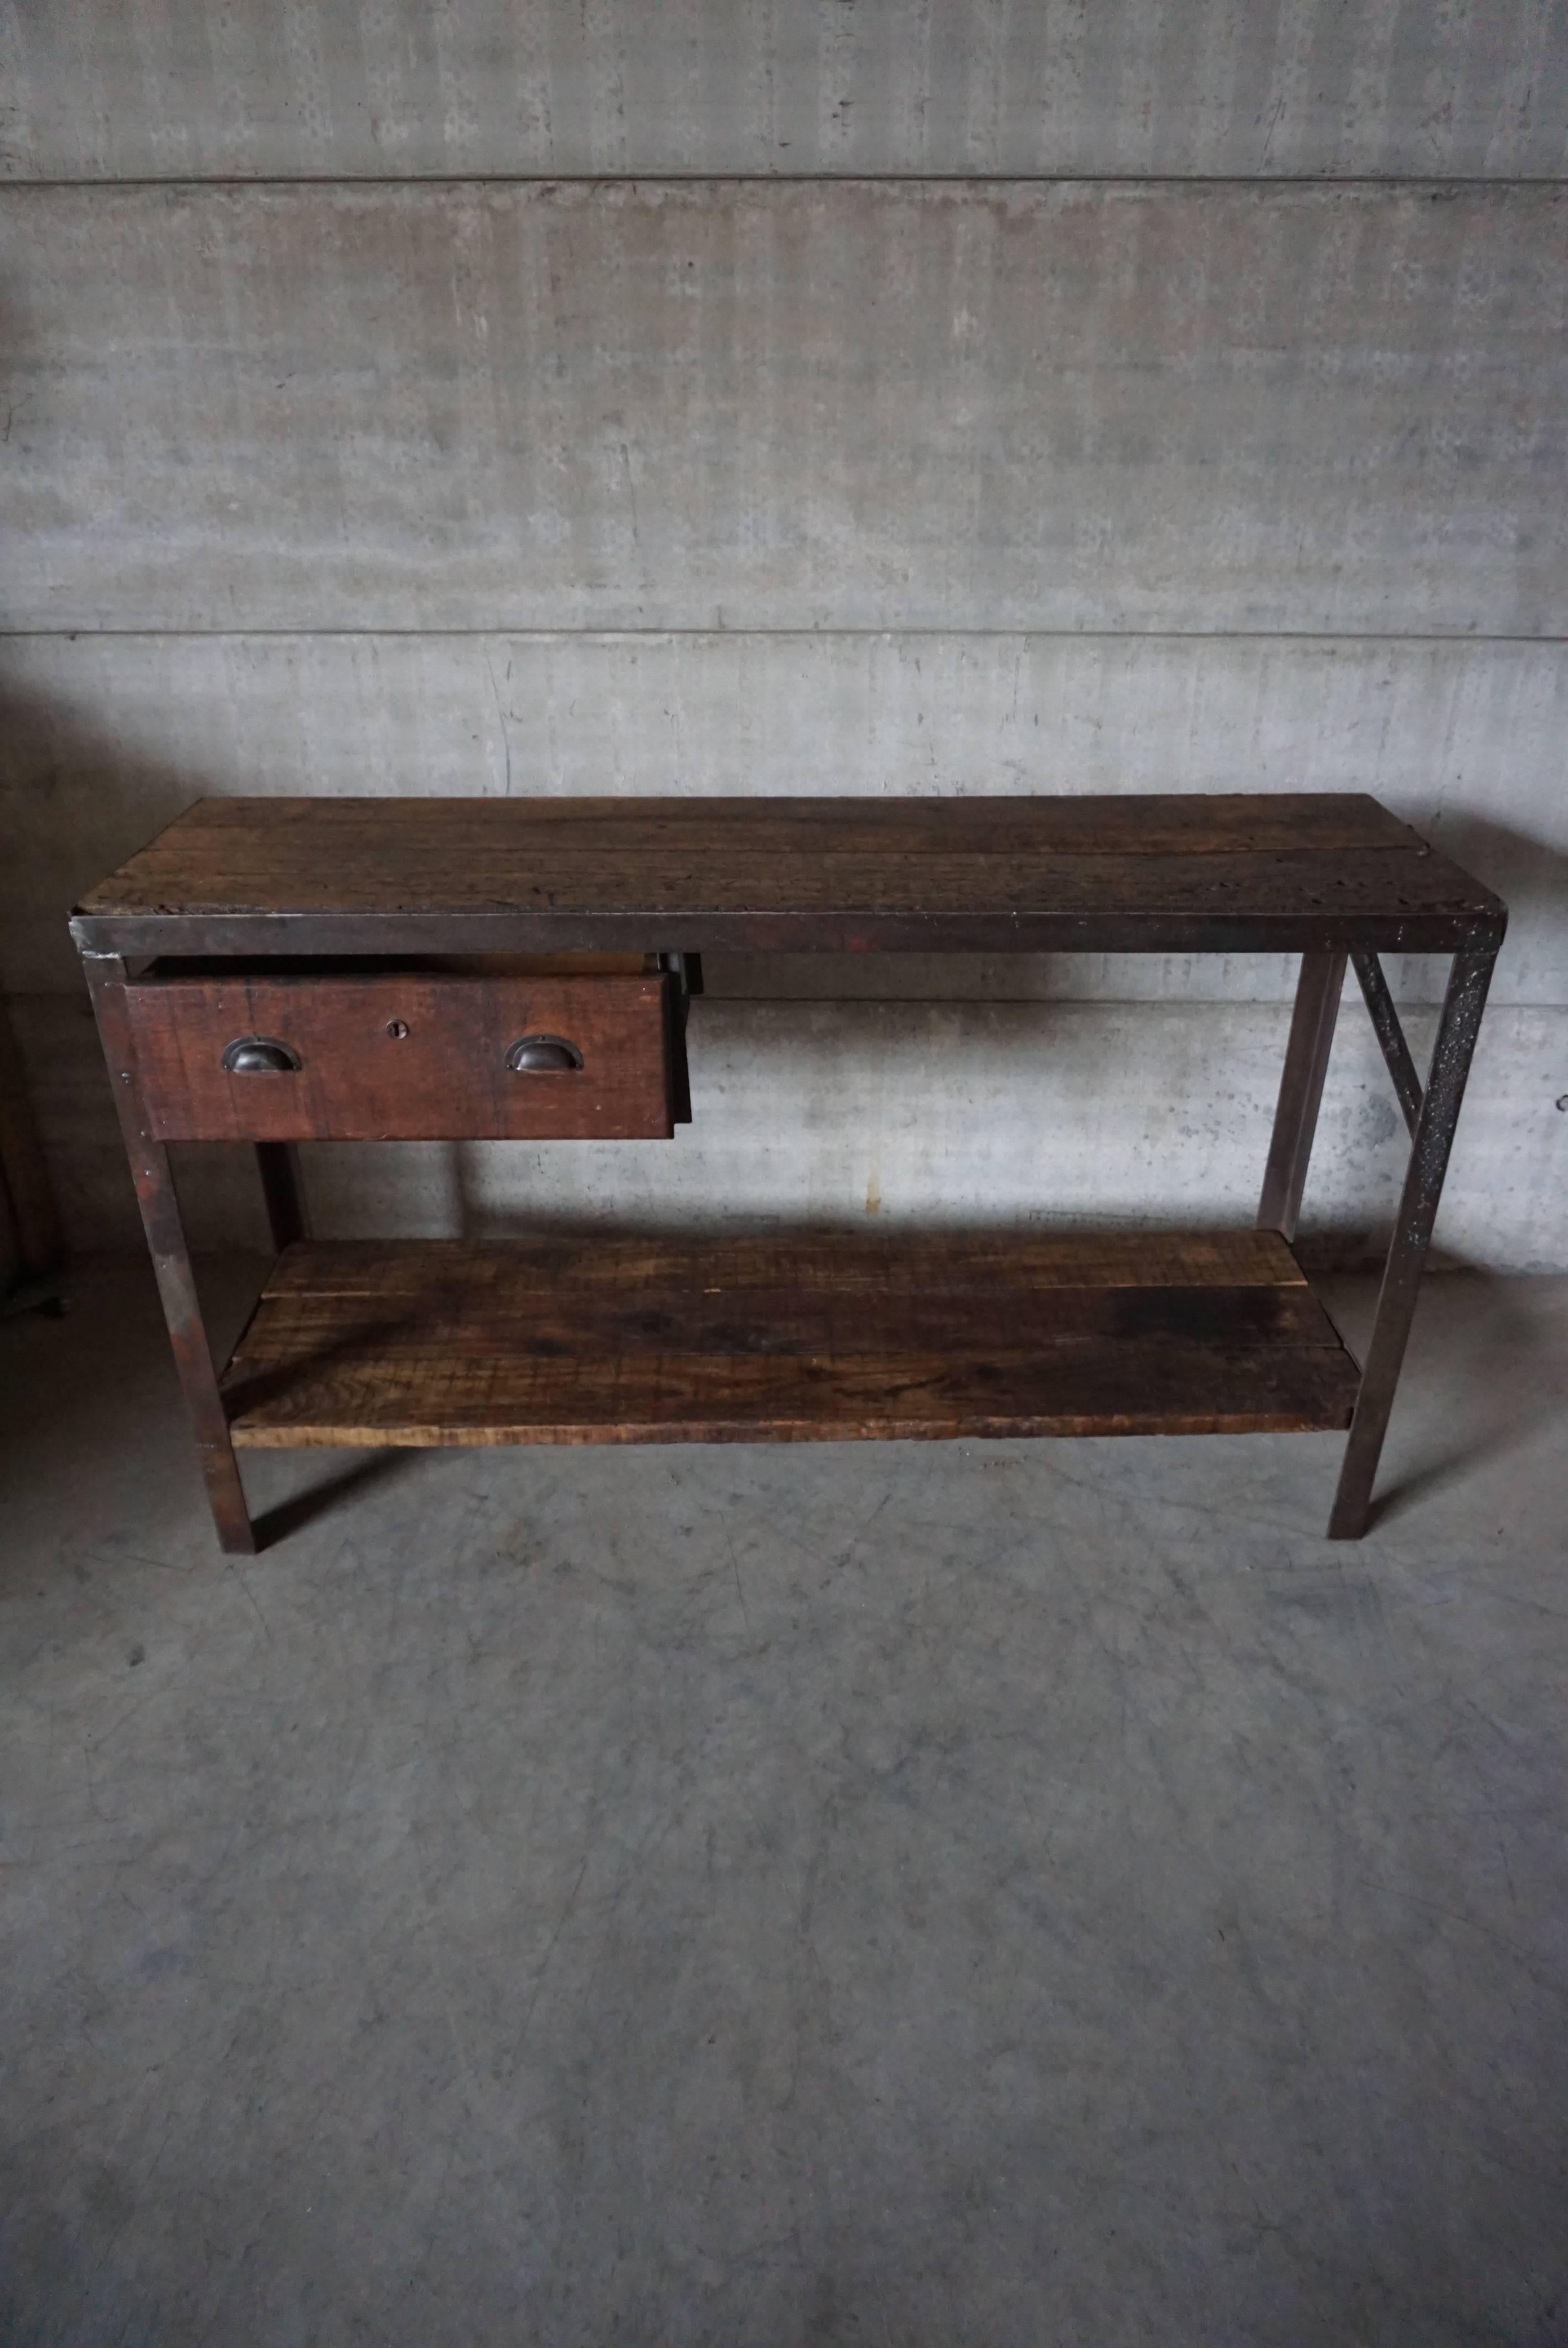 Nice old handmade workbench with industrial looks. Great as a side table, industrial desk, or for shop interiors. The top and bottom are made from old patinated Oak.